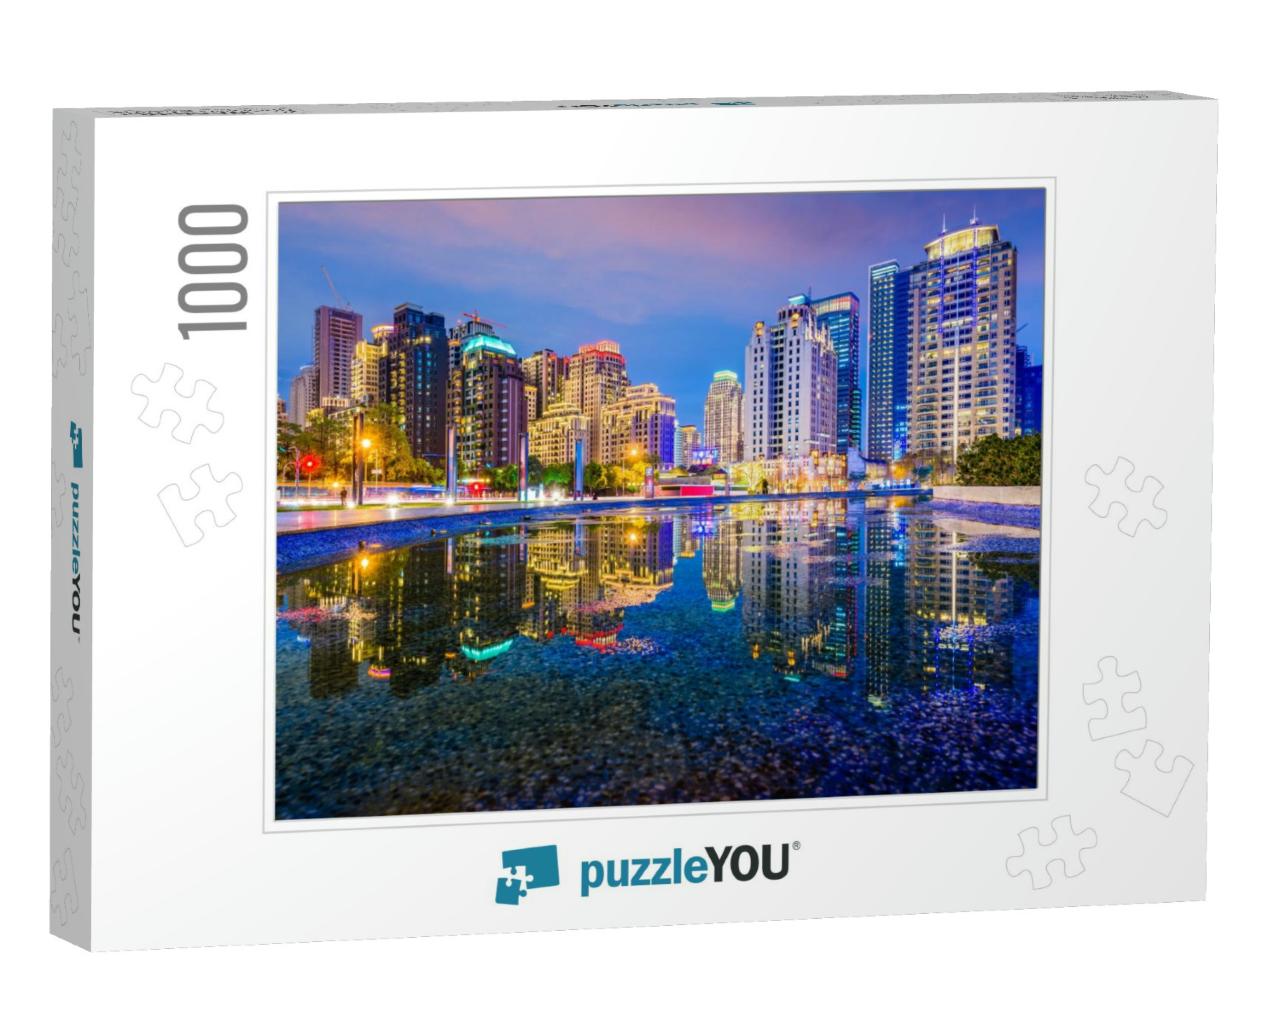 Taichung, Taiwan City Skyline At Night... Jigsaw Puzzle with 1000 pieces